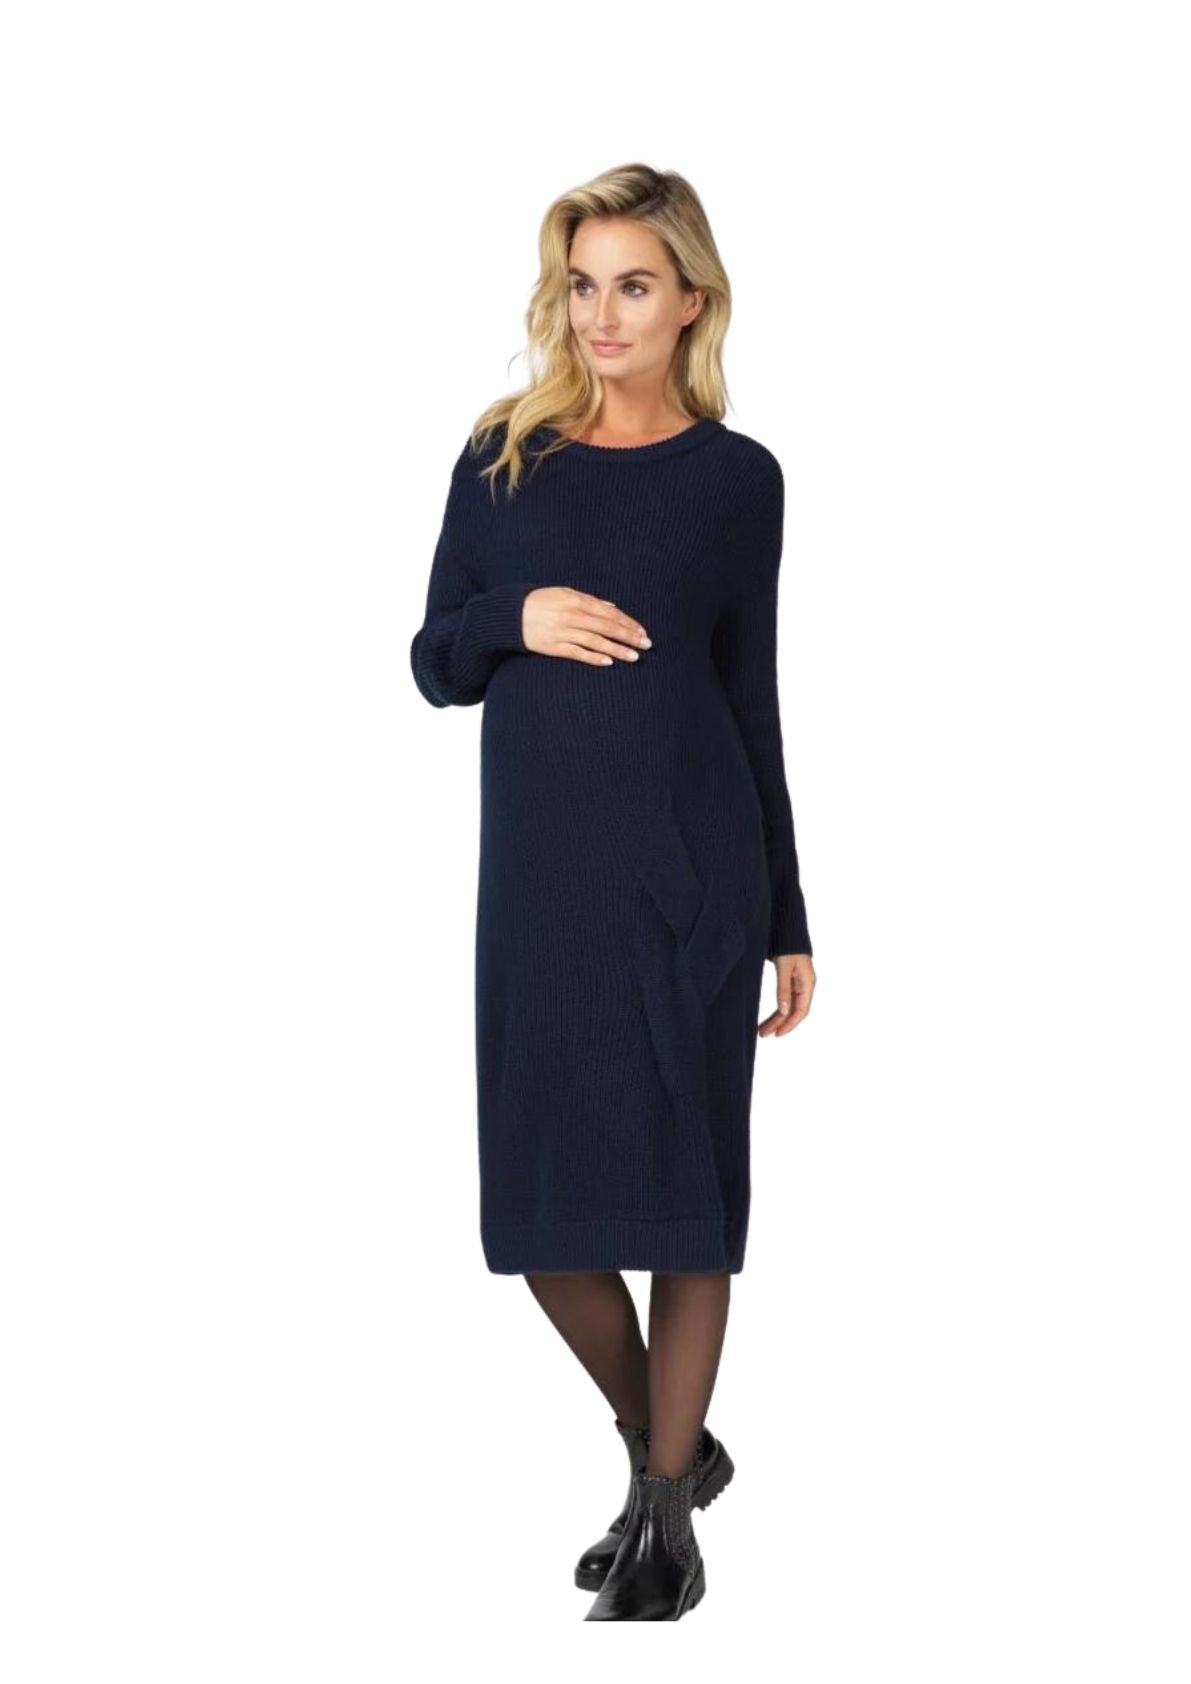 Noppies knitted maternity dress